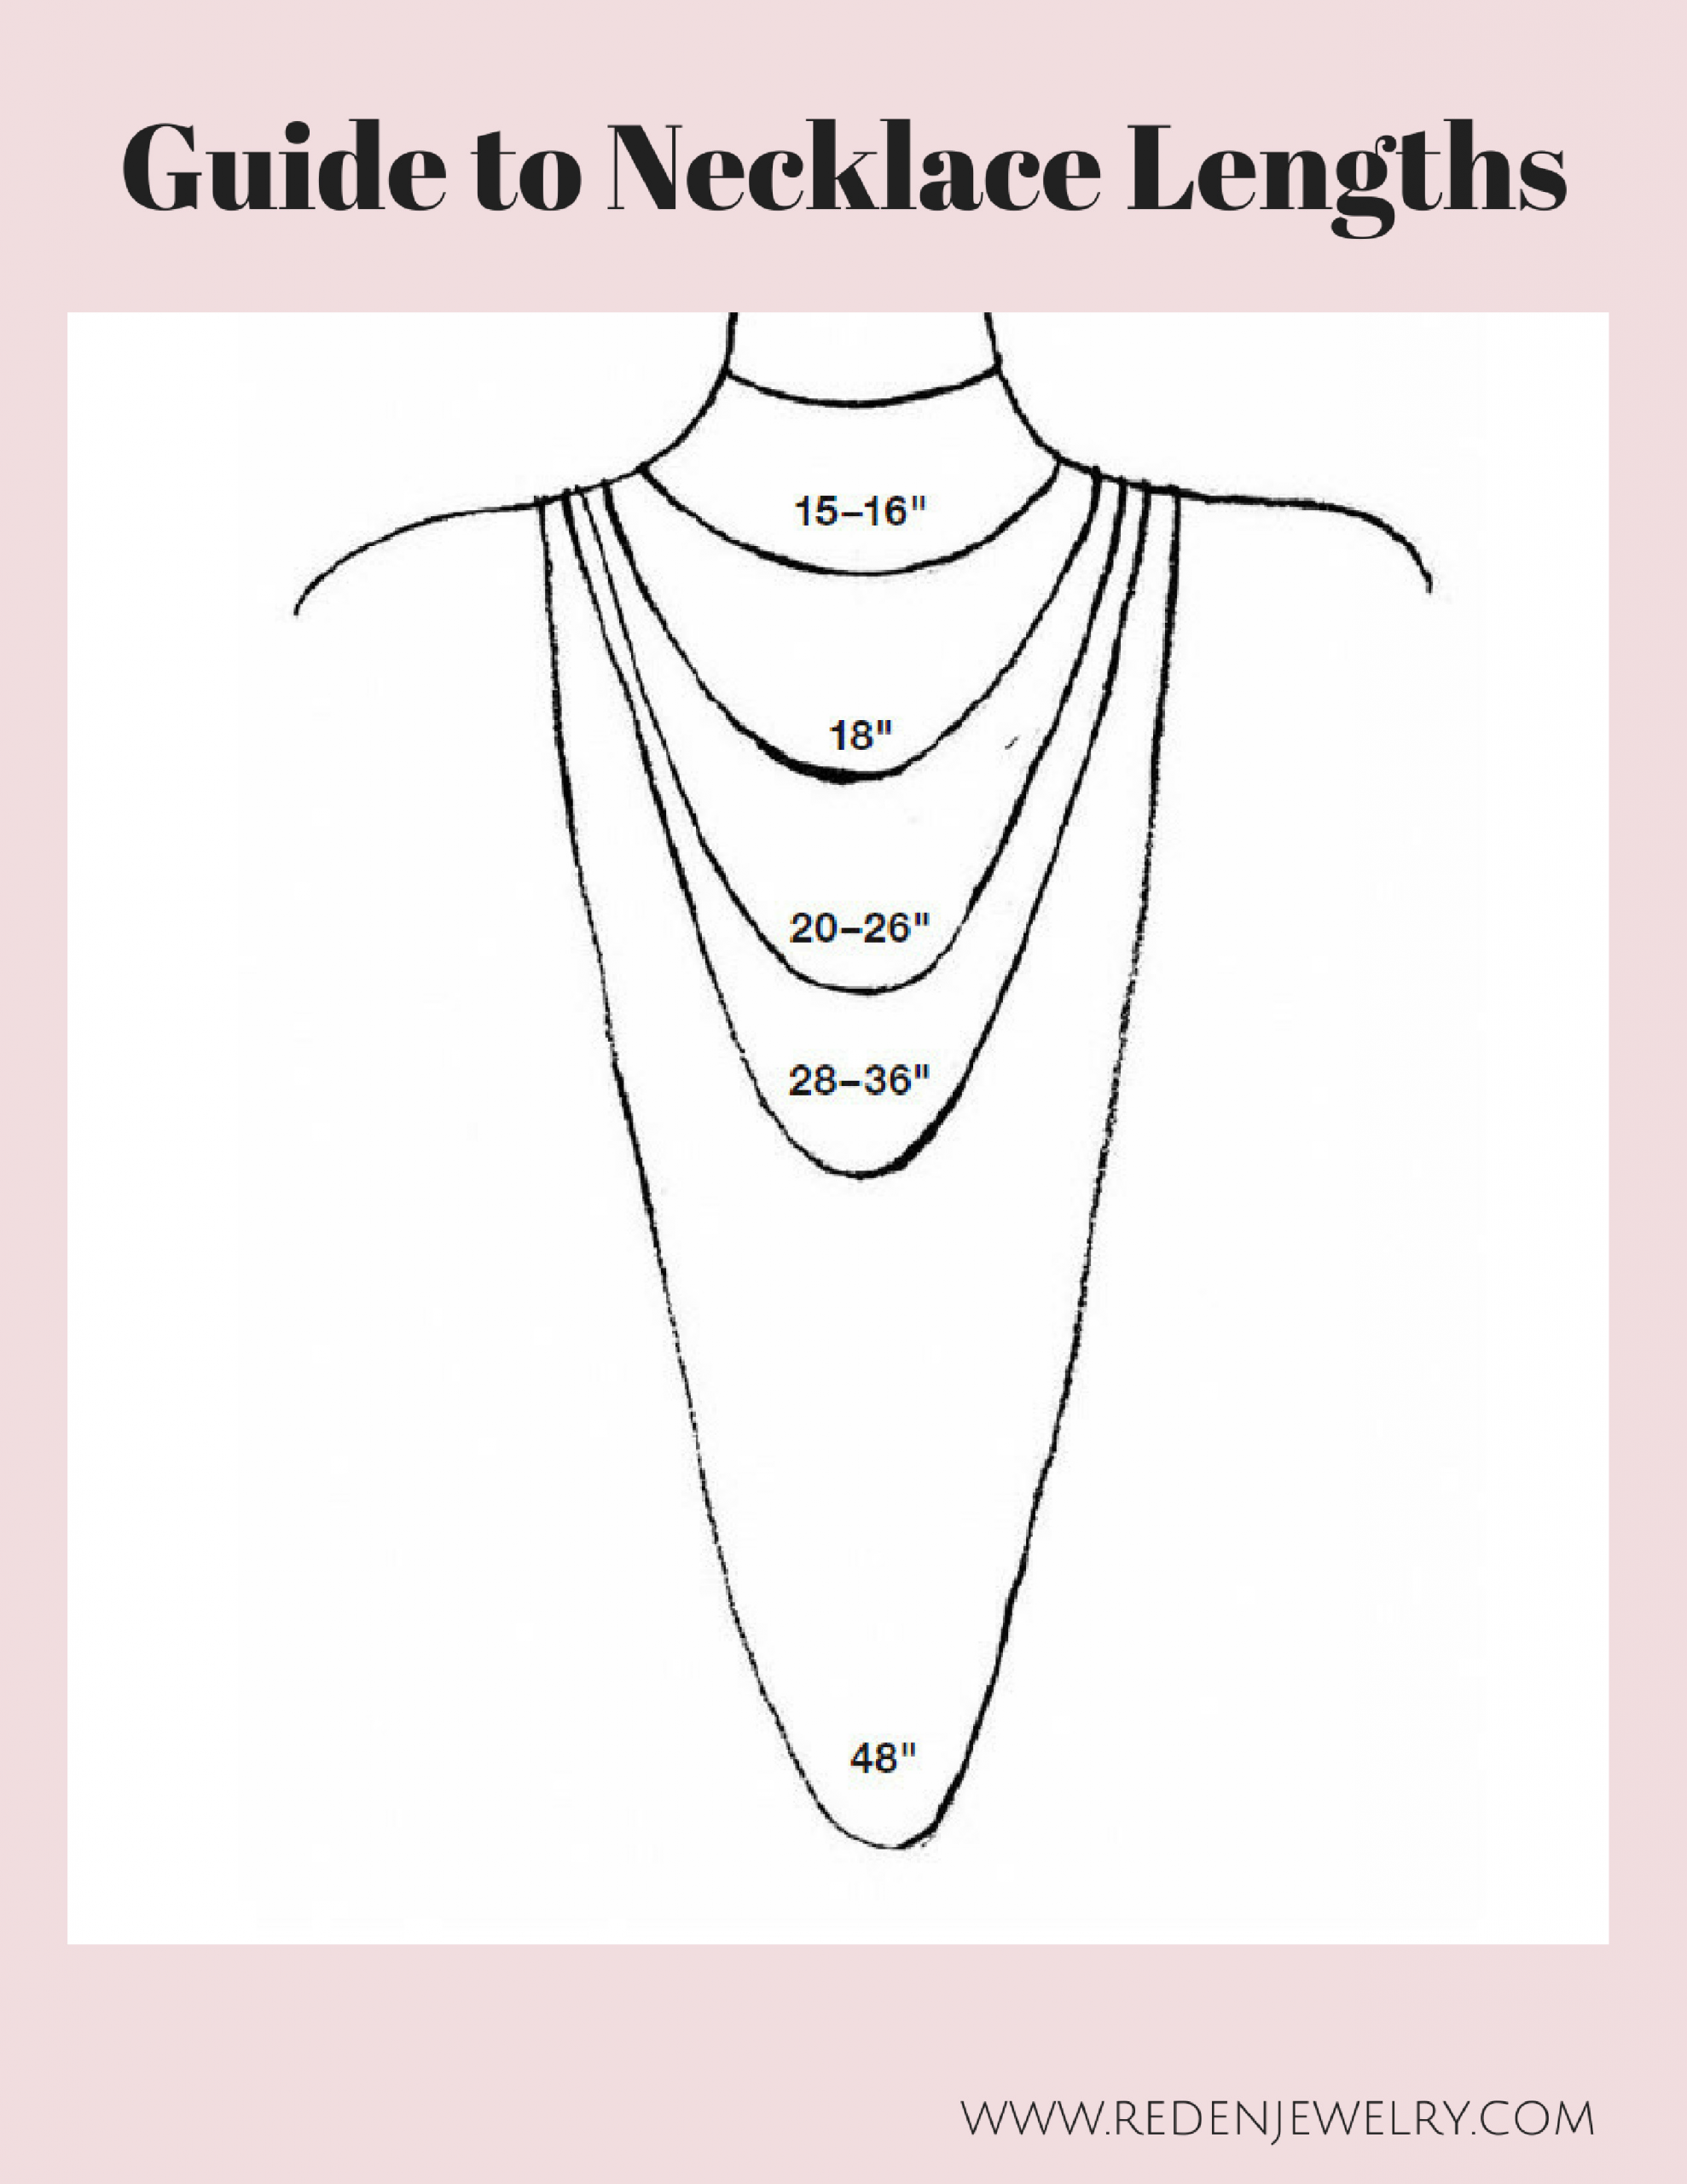 Necklace Size Guide
 Guide to Necklace Lengths